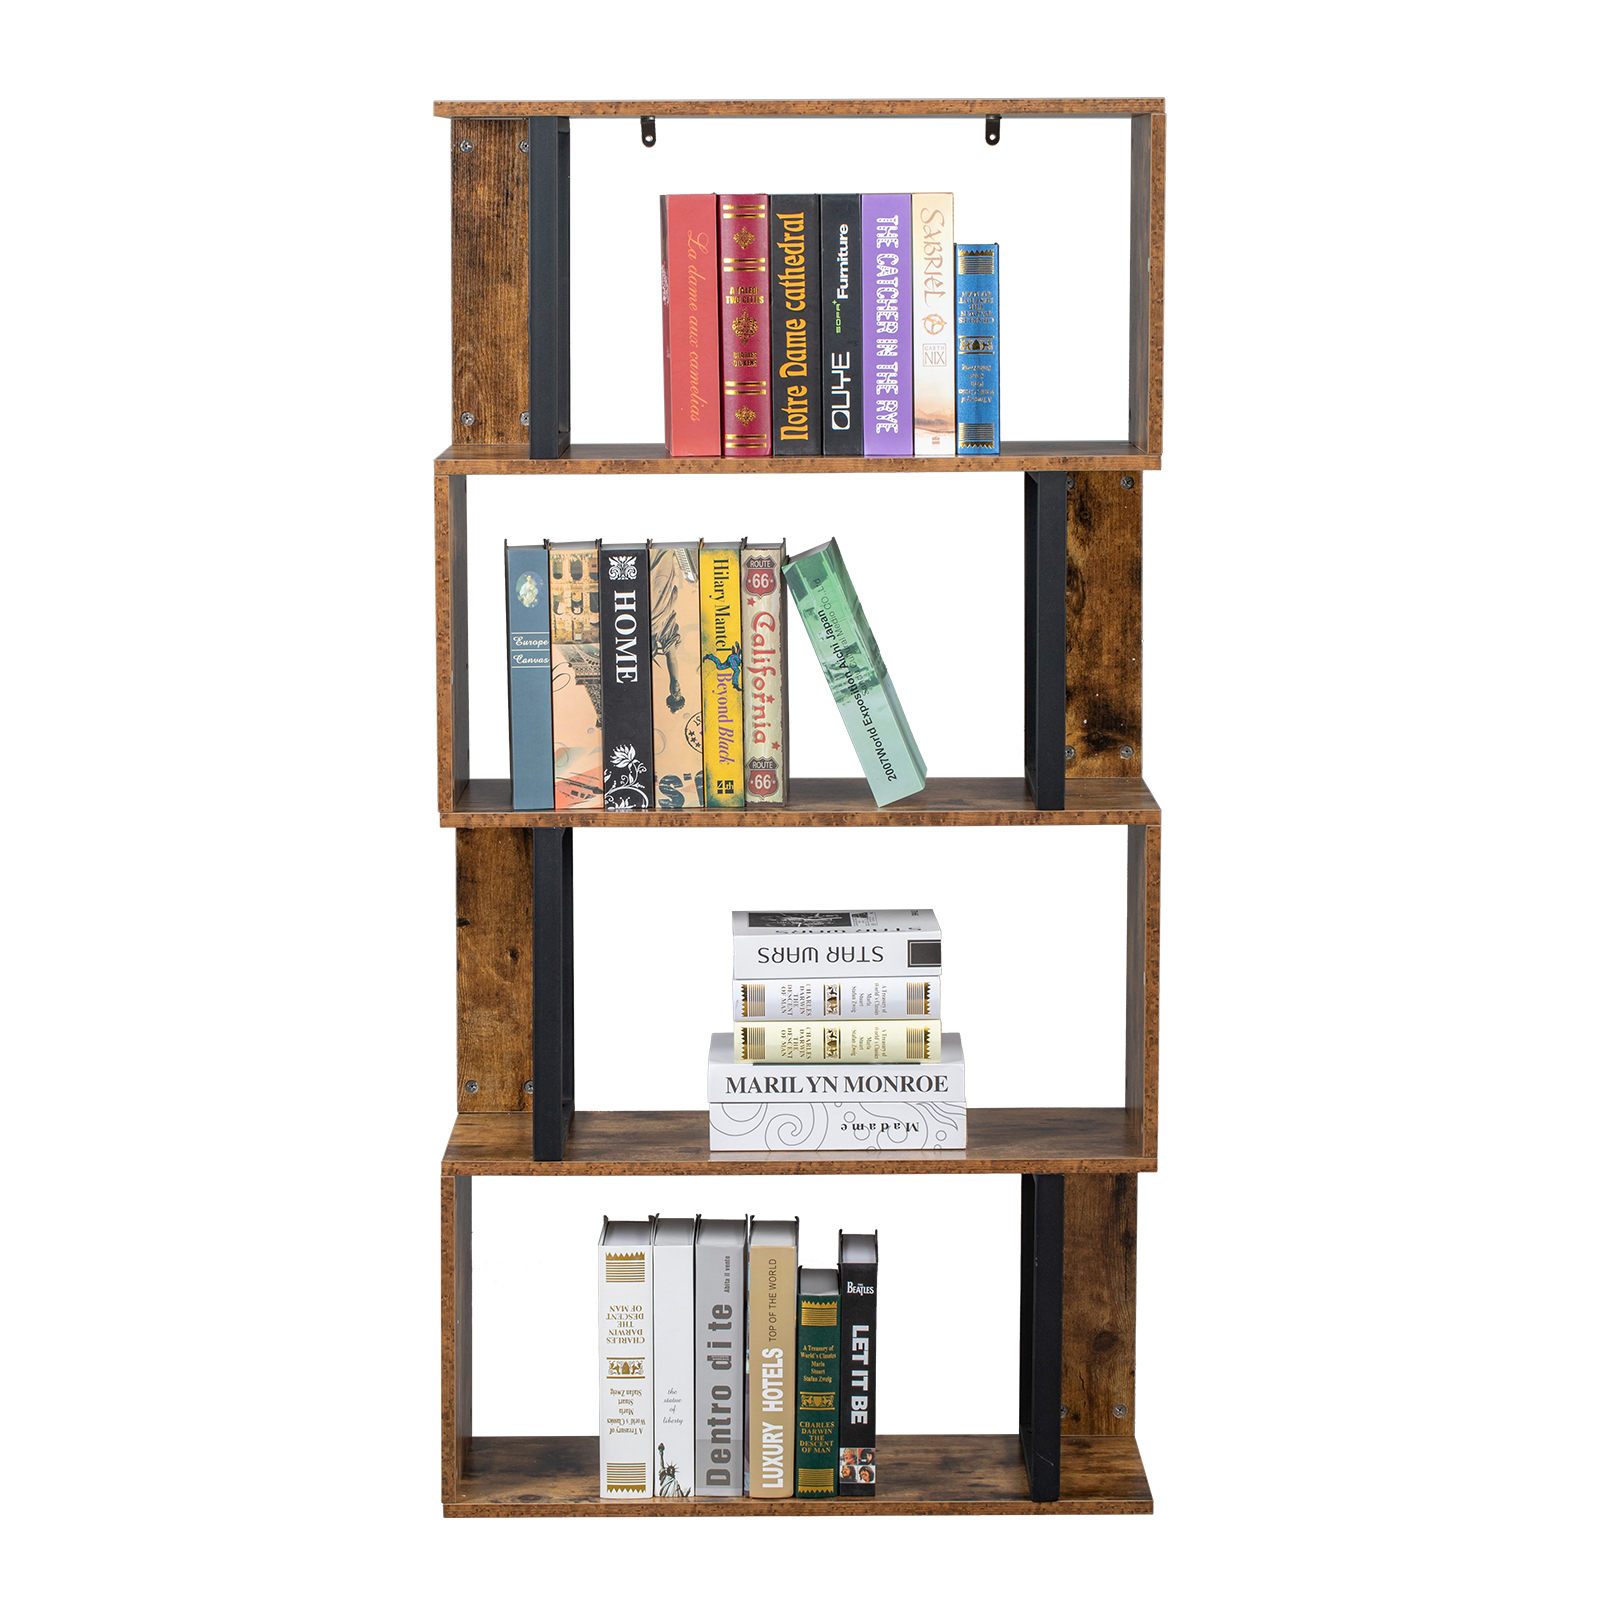 Bookcase and Bookshelf 4 Tier Display Shelf, S-Shaped Z-Shelf Bookshelves, Freestanding Multifunctional Decorative Storage Shelving for Home Office, Vintage Brown Industrial Style